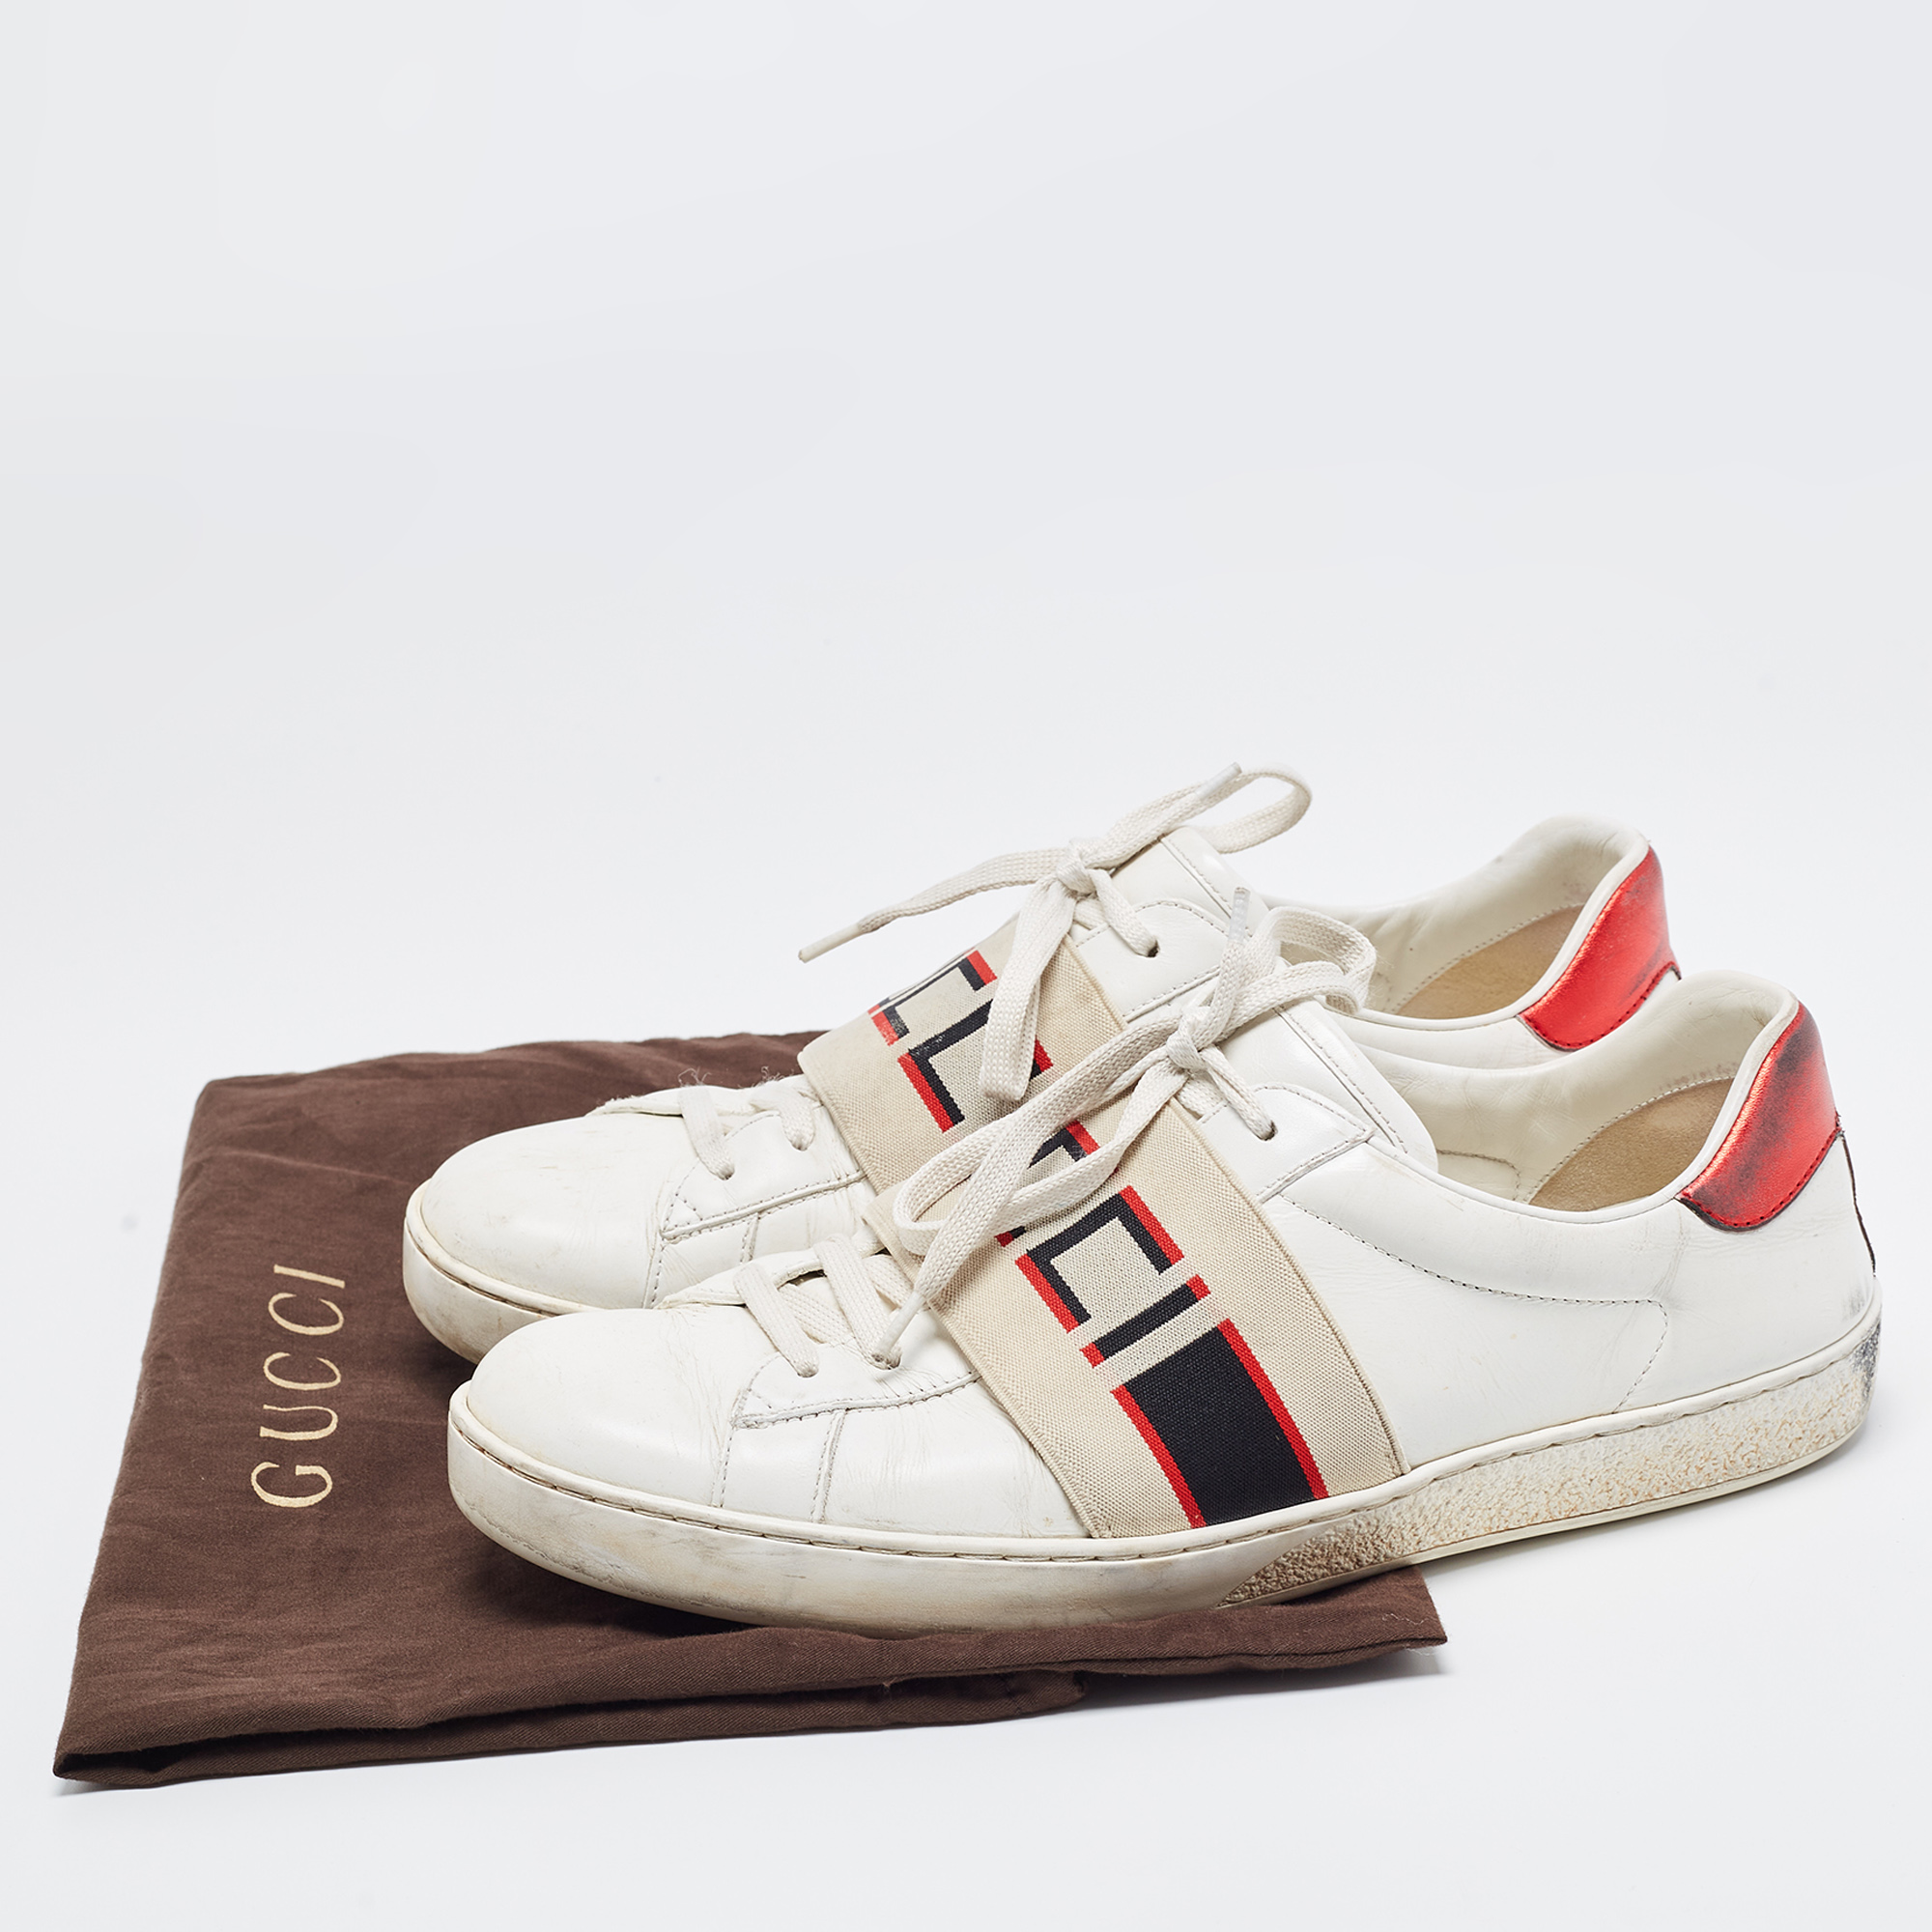 Gucci White Leather Logo Band Ace Sneakers Size 41.5